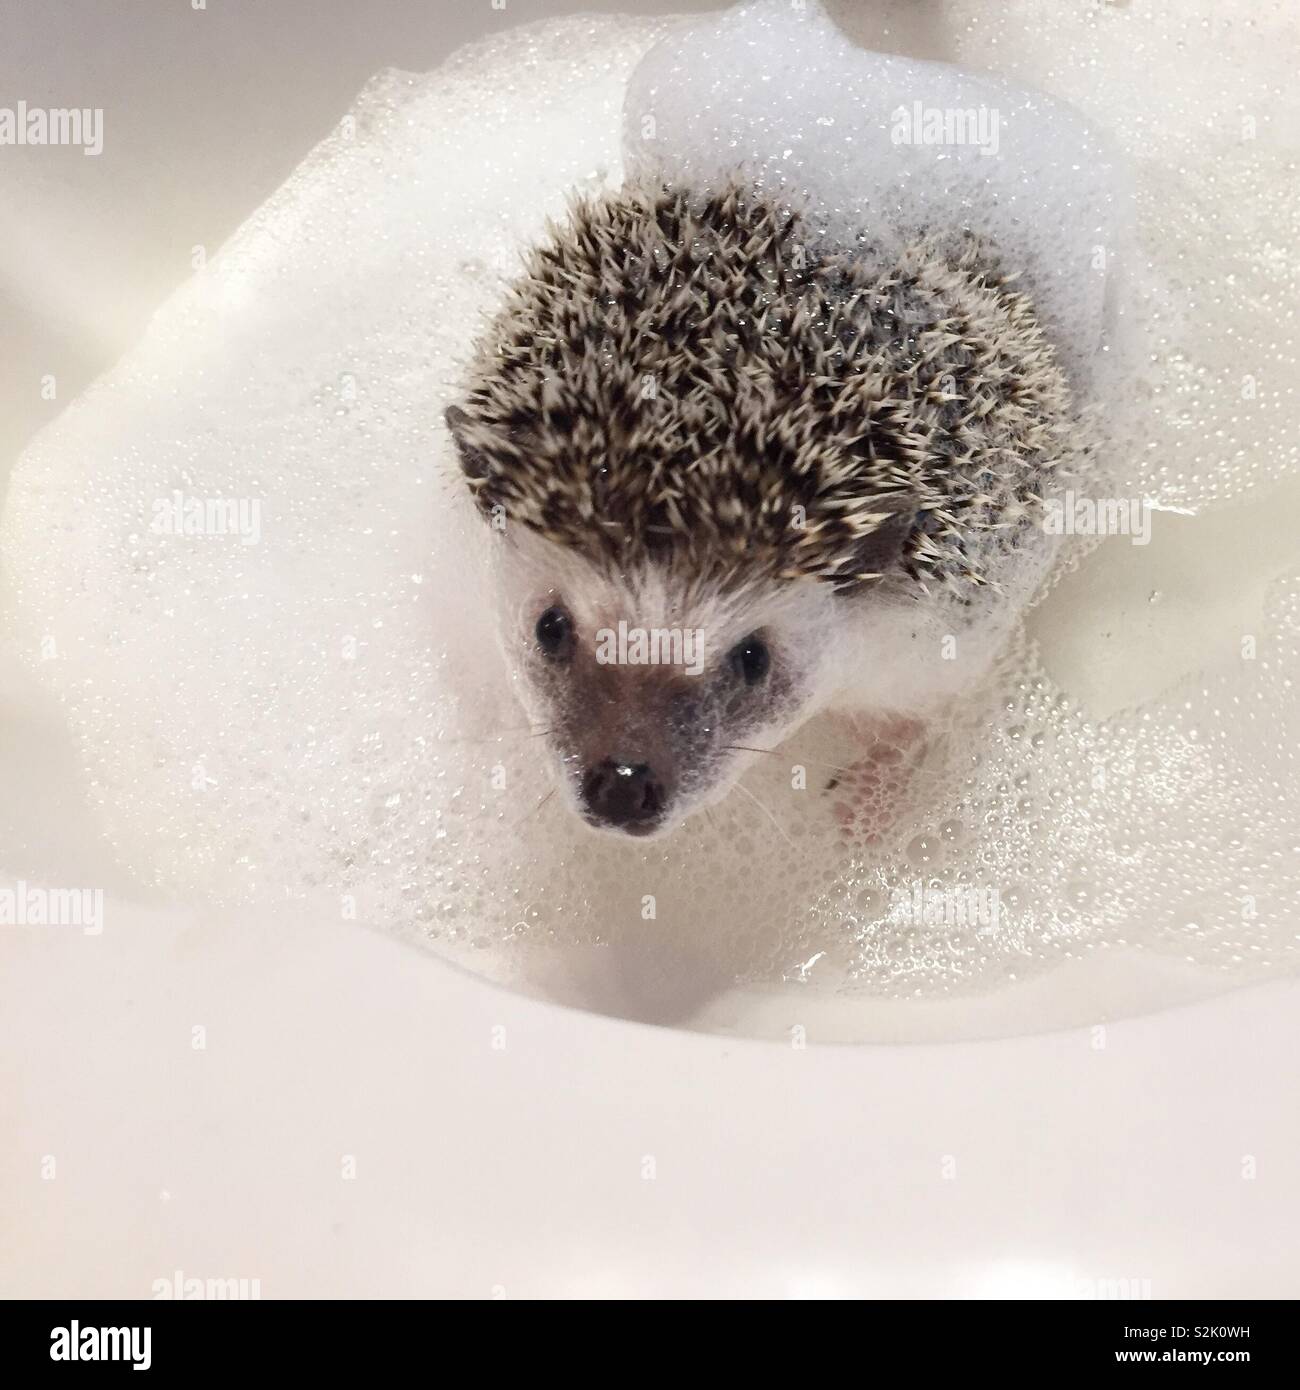 This little hedgehog is enjoying her weekly bubble bath to keep her skin soft and smooth! Stock Photo